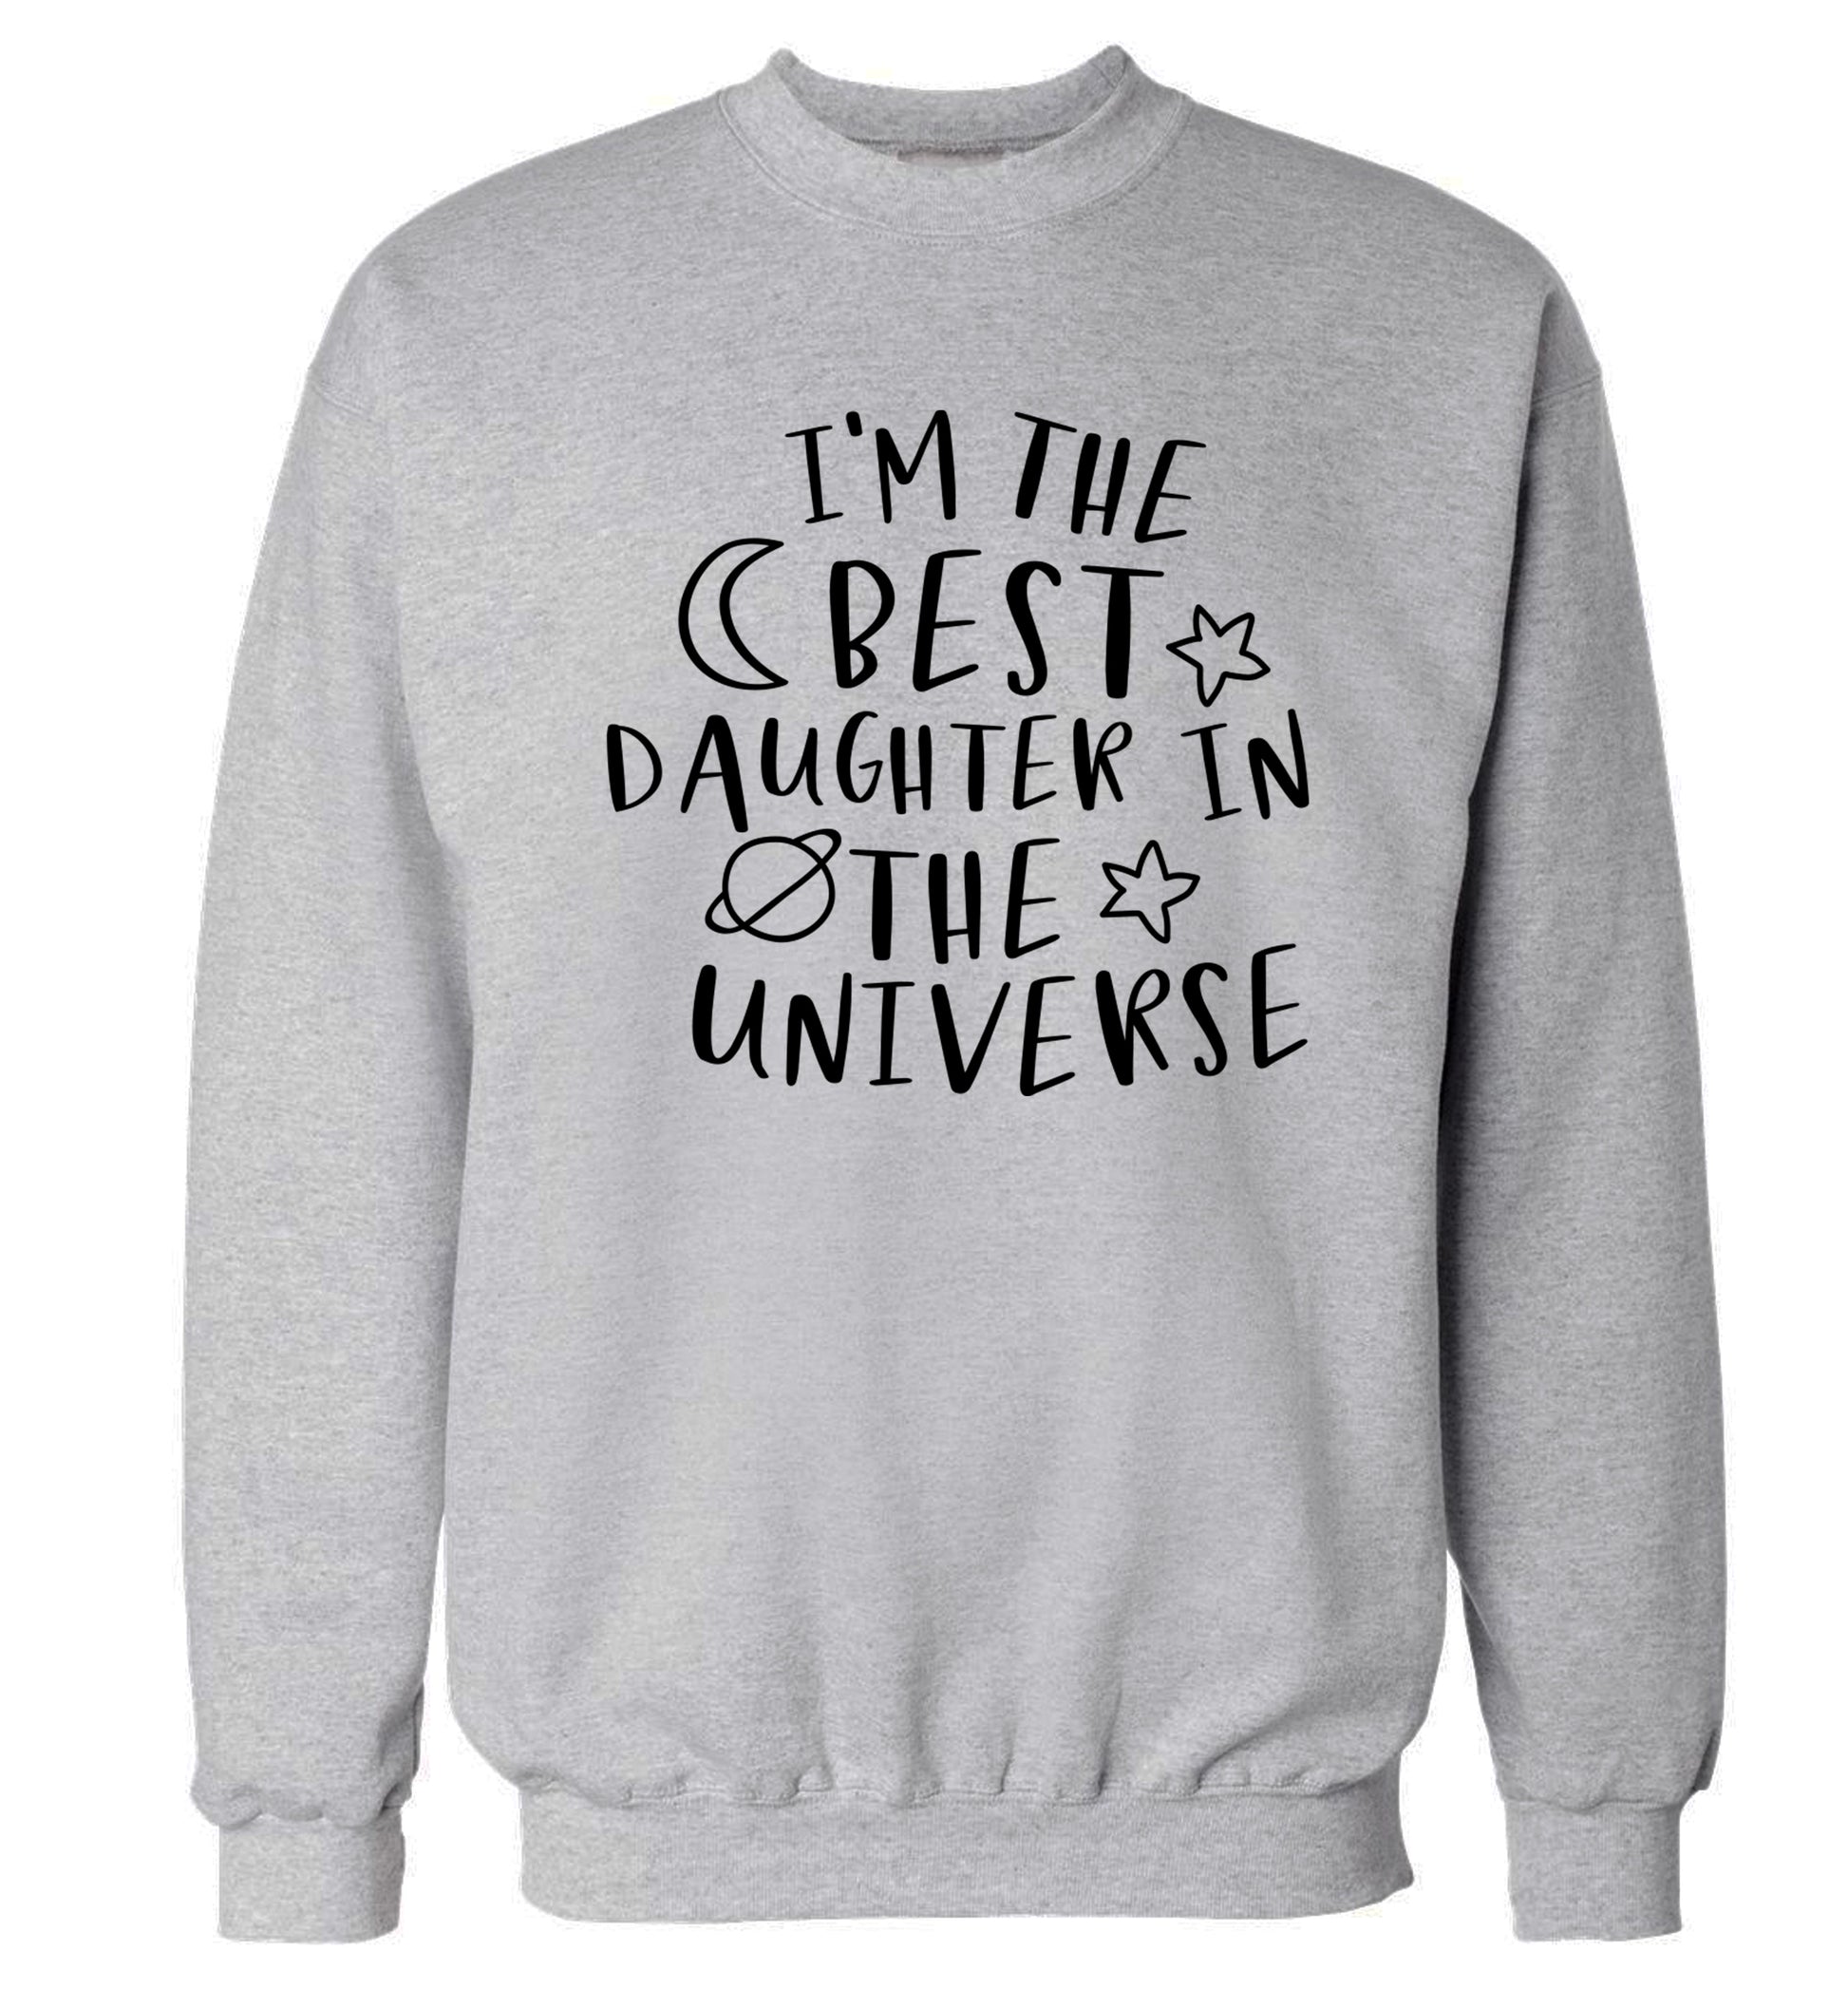 I'm the best daughter in the universe Adult's unisex grey Sweater 2XL